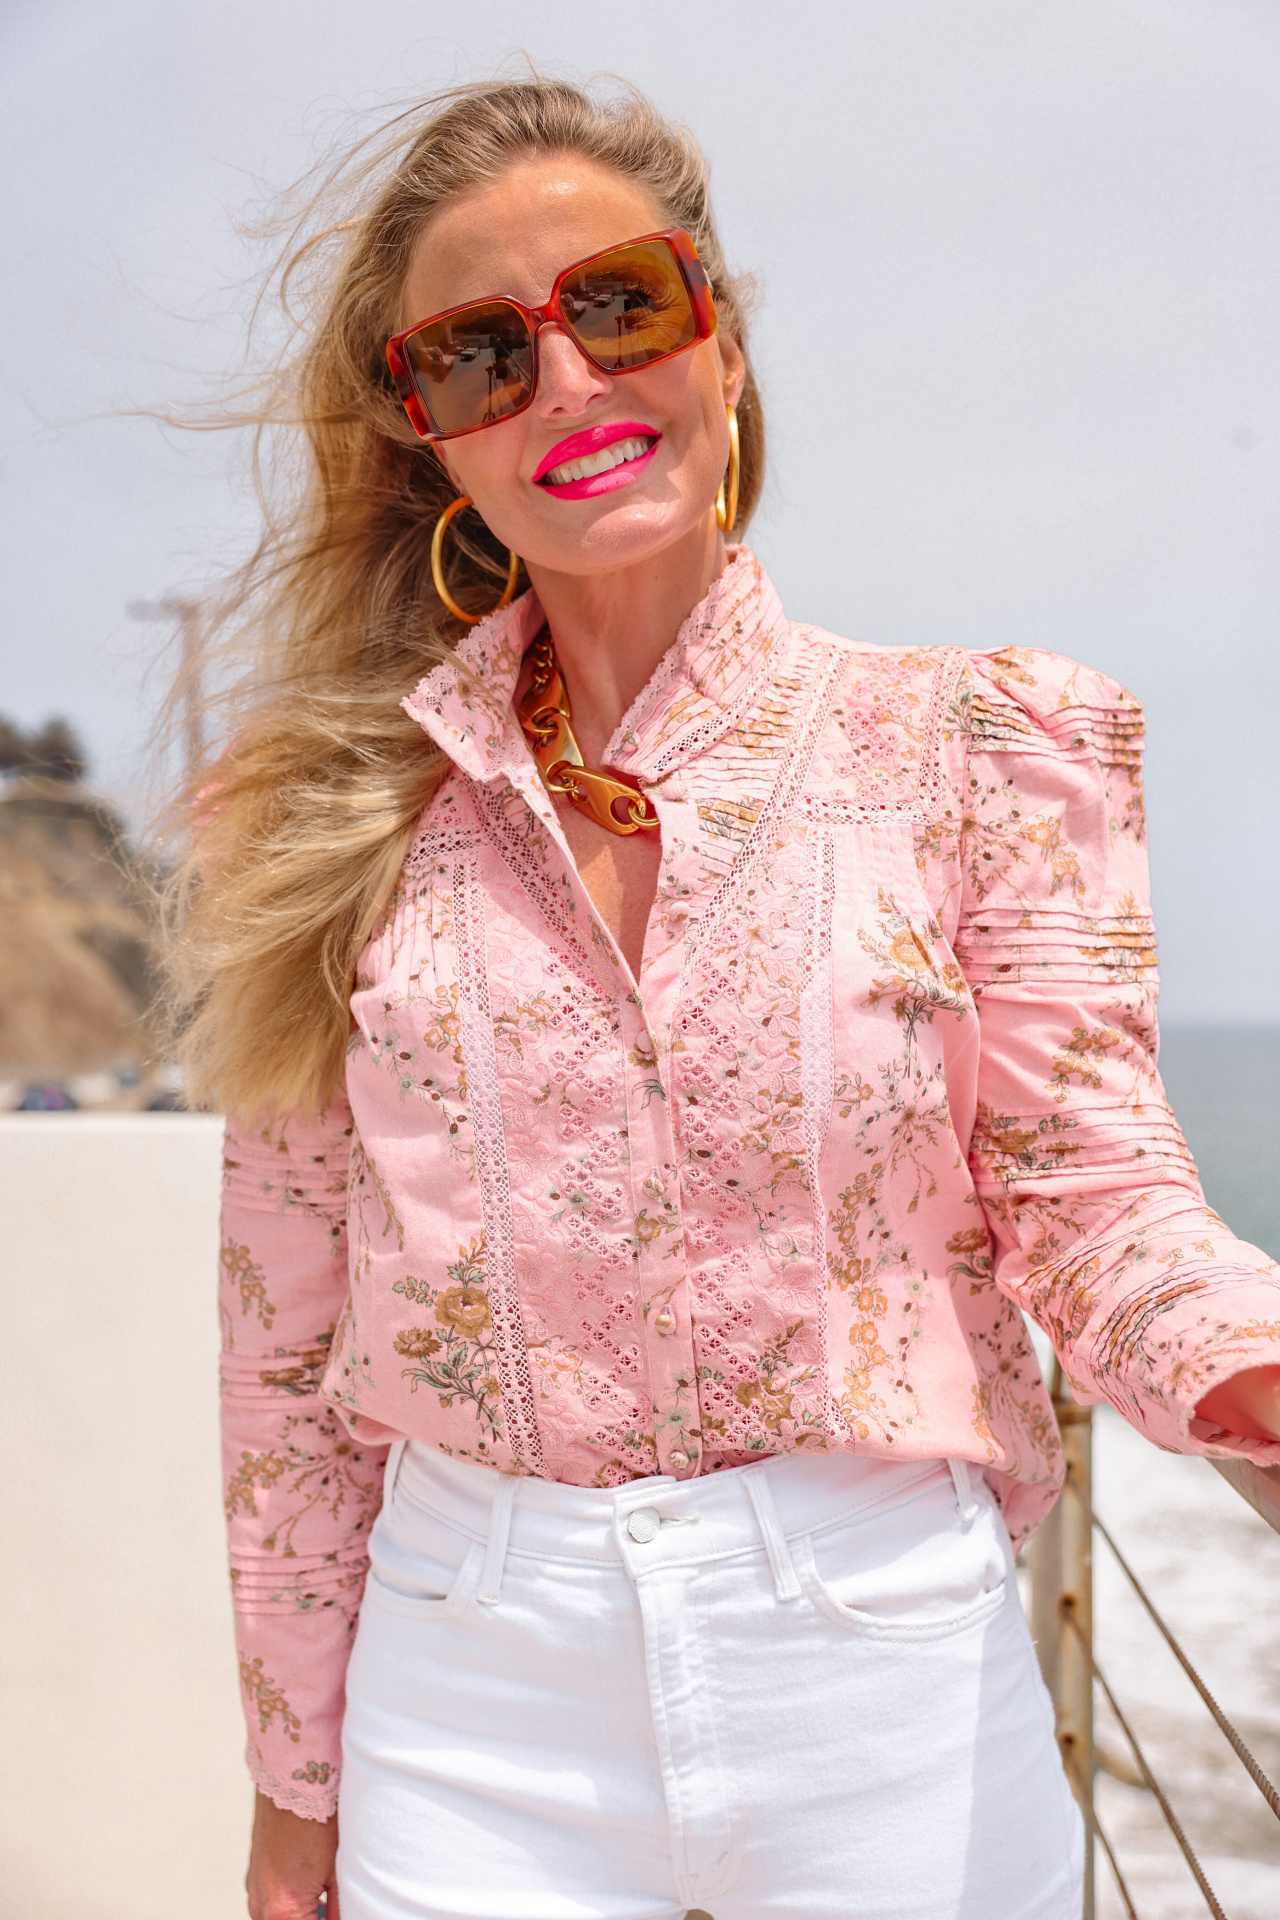 summer mom style, best summer mom outfits, summer mom outfits 2022, casual mom outfits summer, stylish mom outfits 2022, fashion for moms in their 30s, fashion for moms in their 40s, cute mom outfits, casual mom outfits, erin busbee, busbee style, fashion over 40, malibu, california, loveshackfancy pink printed top, white mother hustler jeans, see by chloe platform heels, saint laurent square sunglasses, paco rabbane chunky gold necklace, dean davidson hoops